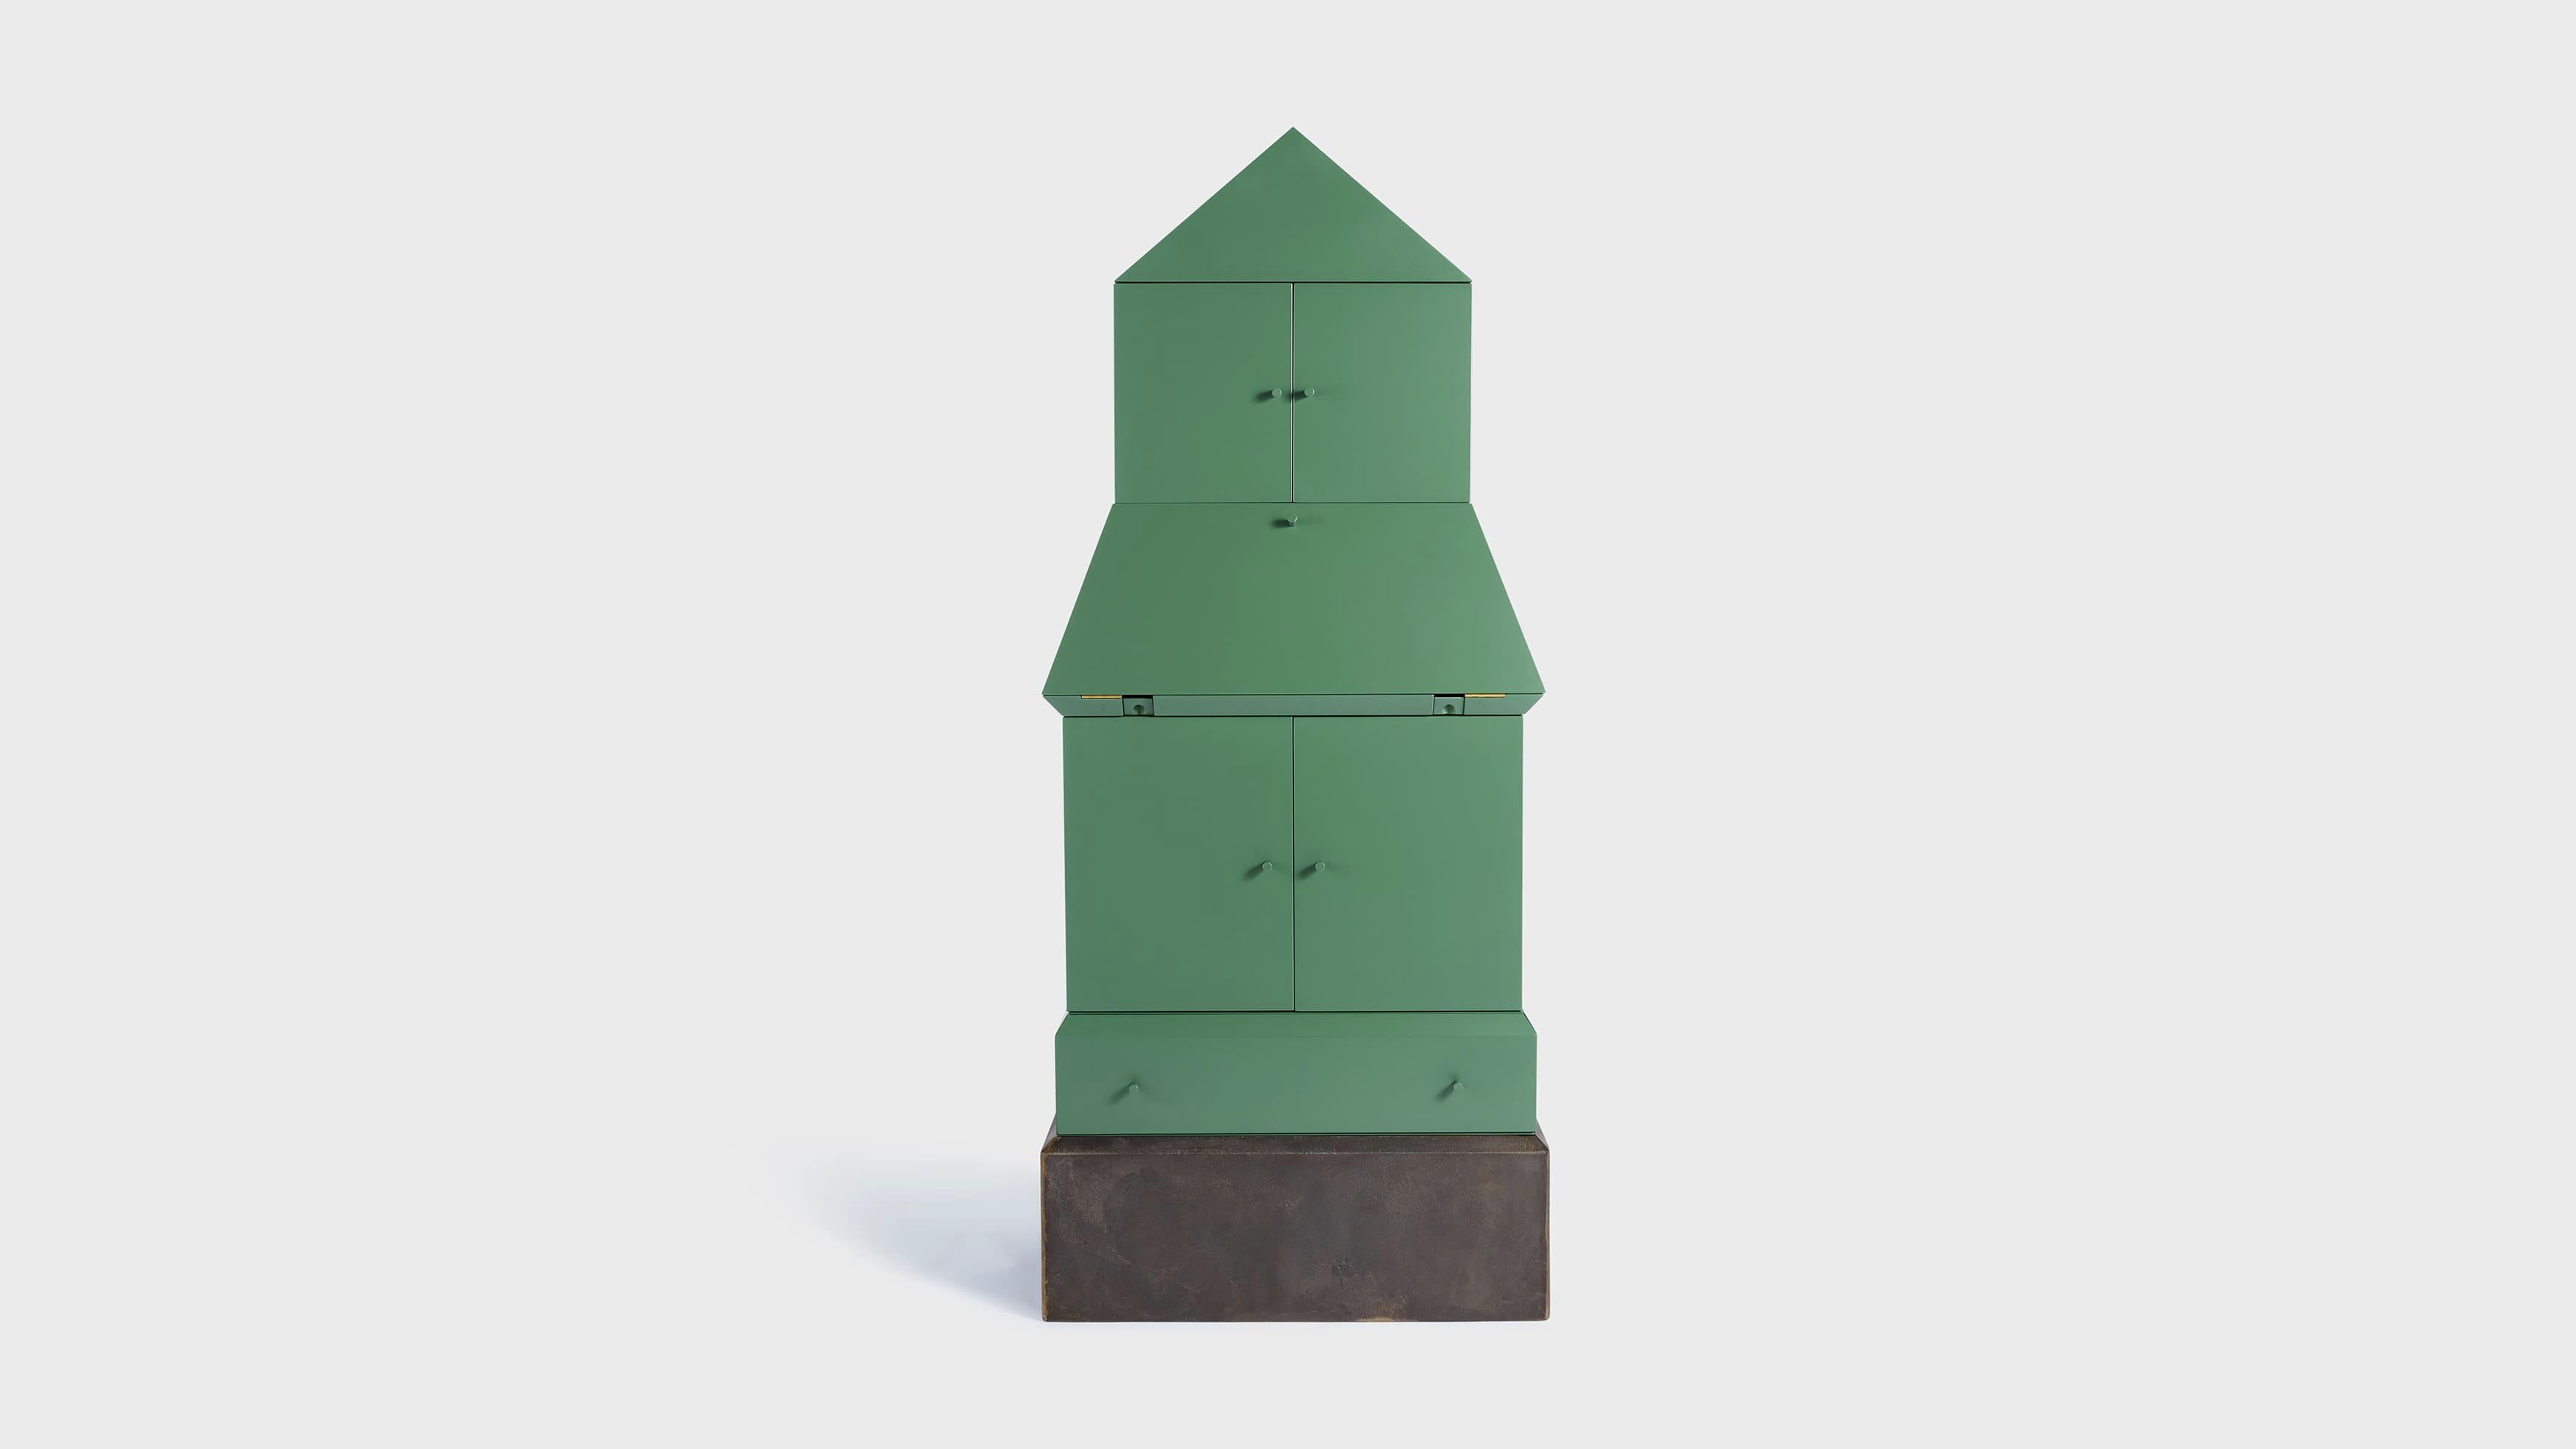 The lasting cabinet is an iconic statement piece inspired by Neo-classcial architecture and Victorian design. Harking back to an era when things were 'built-to-last' the cabinet uses processes like iron casting, poured in a foundry local to Edward